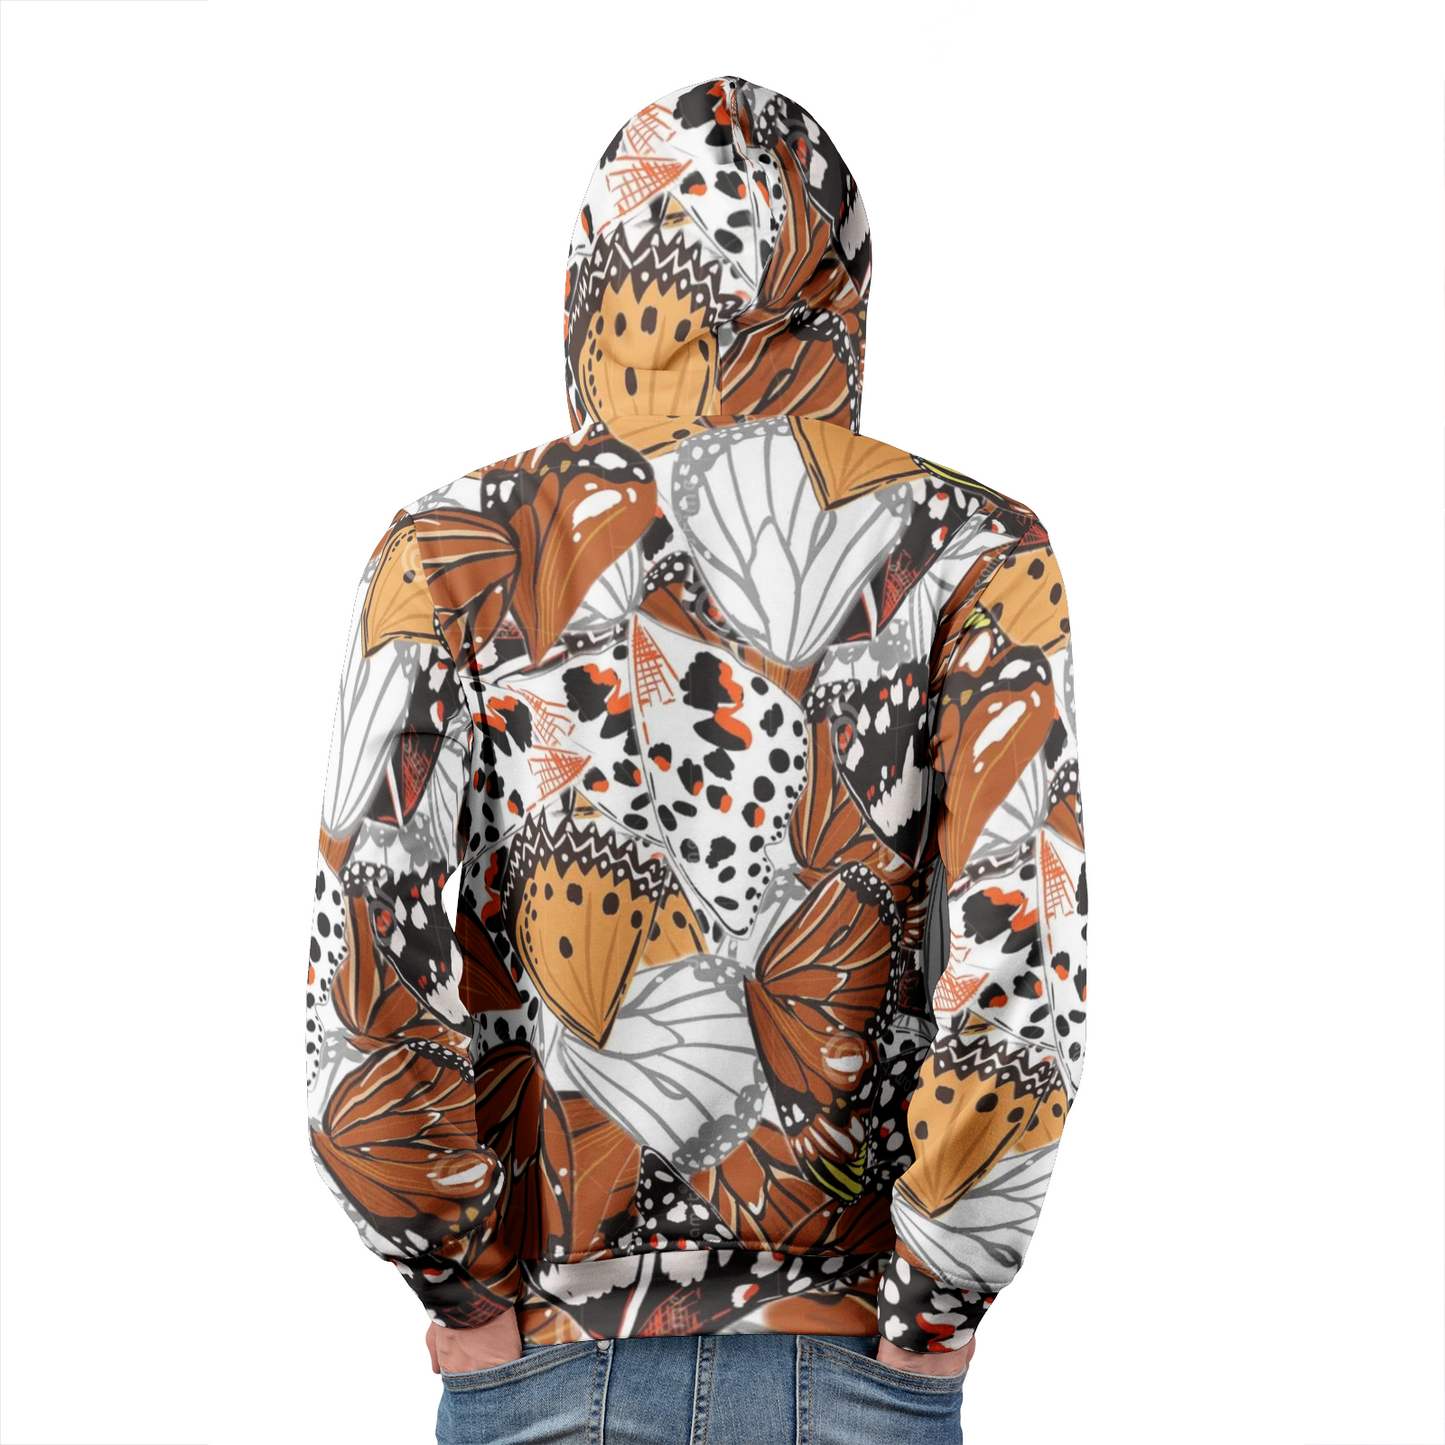 "510_Athletics" "ButterCamo" "The Natural" Pullover Hoodie